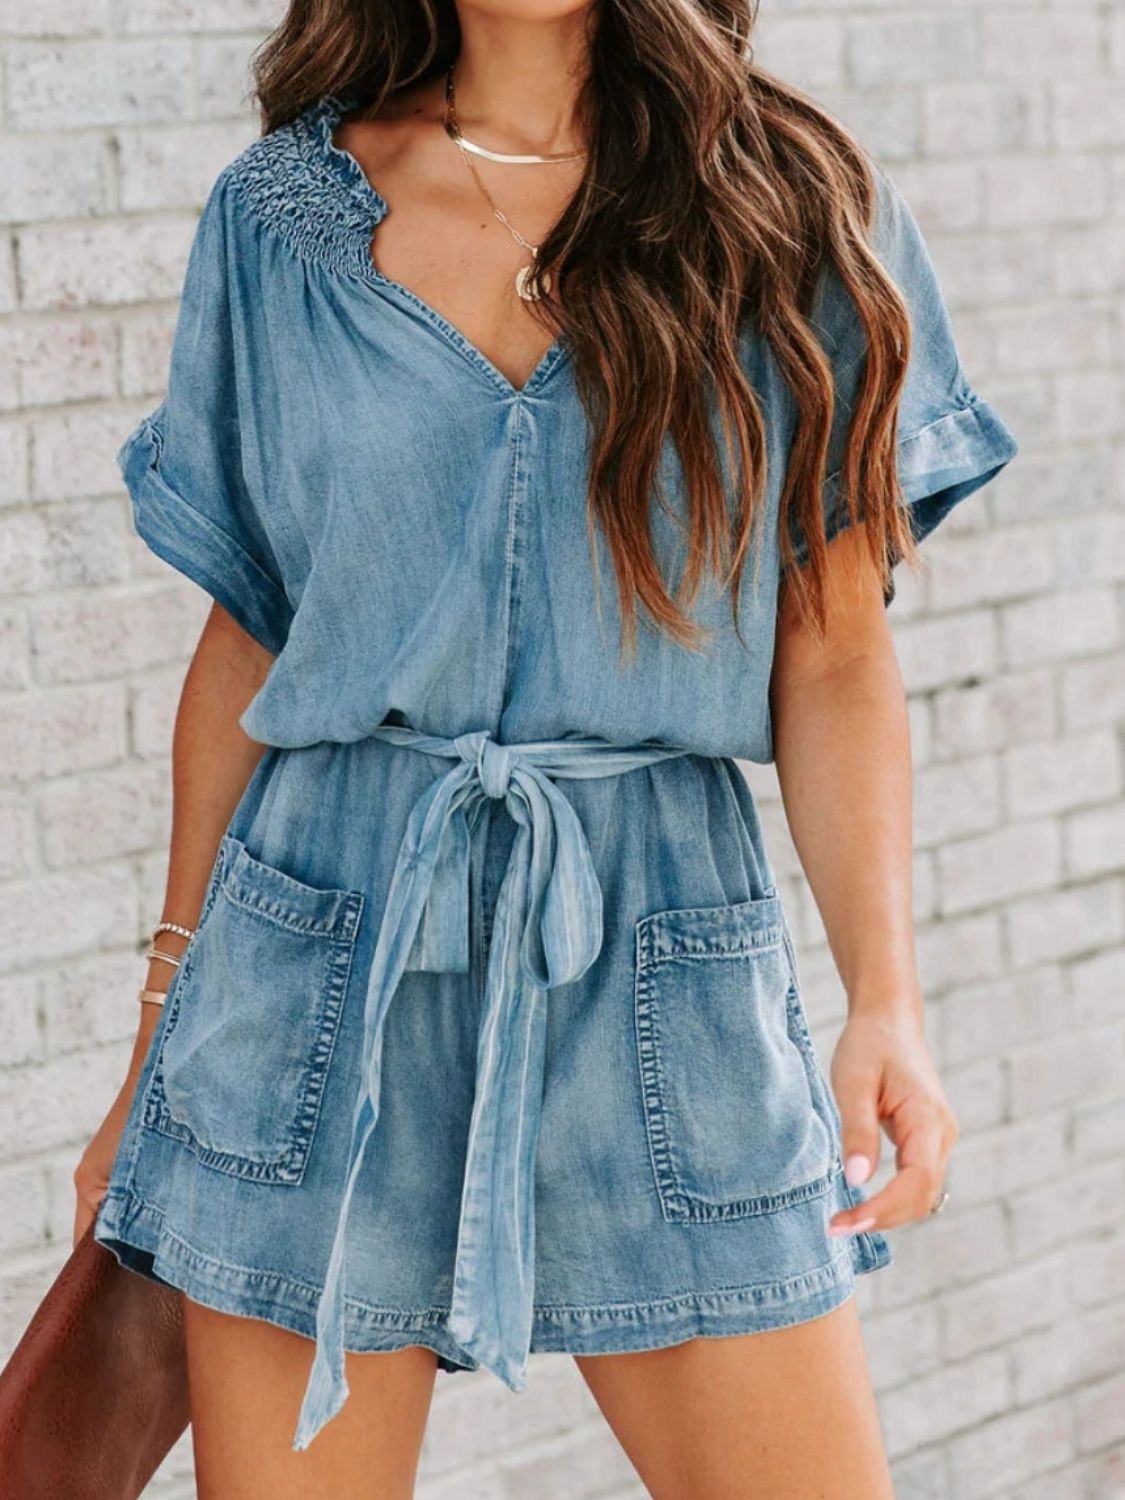 Chic denim romper with notched neckline and adjustable tie waist for a perfect fit. Versatile, comfortable, and perfect for summer days.